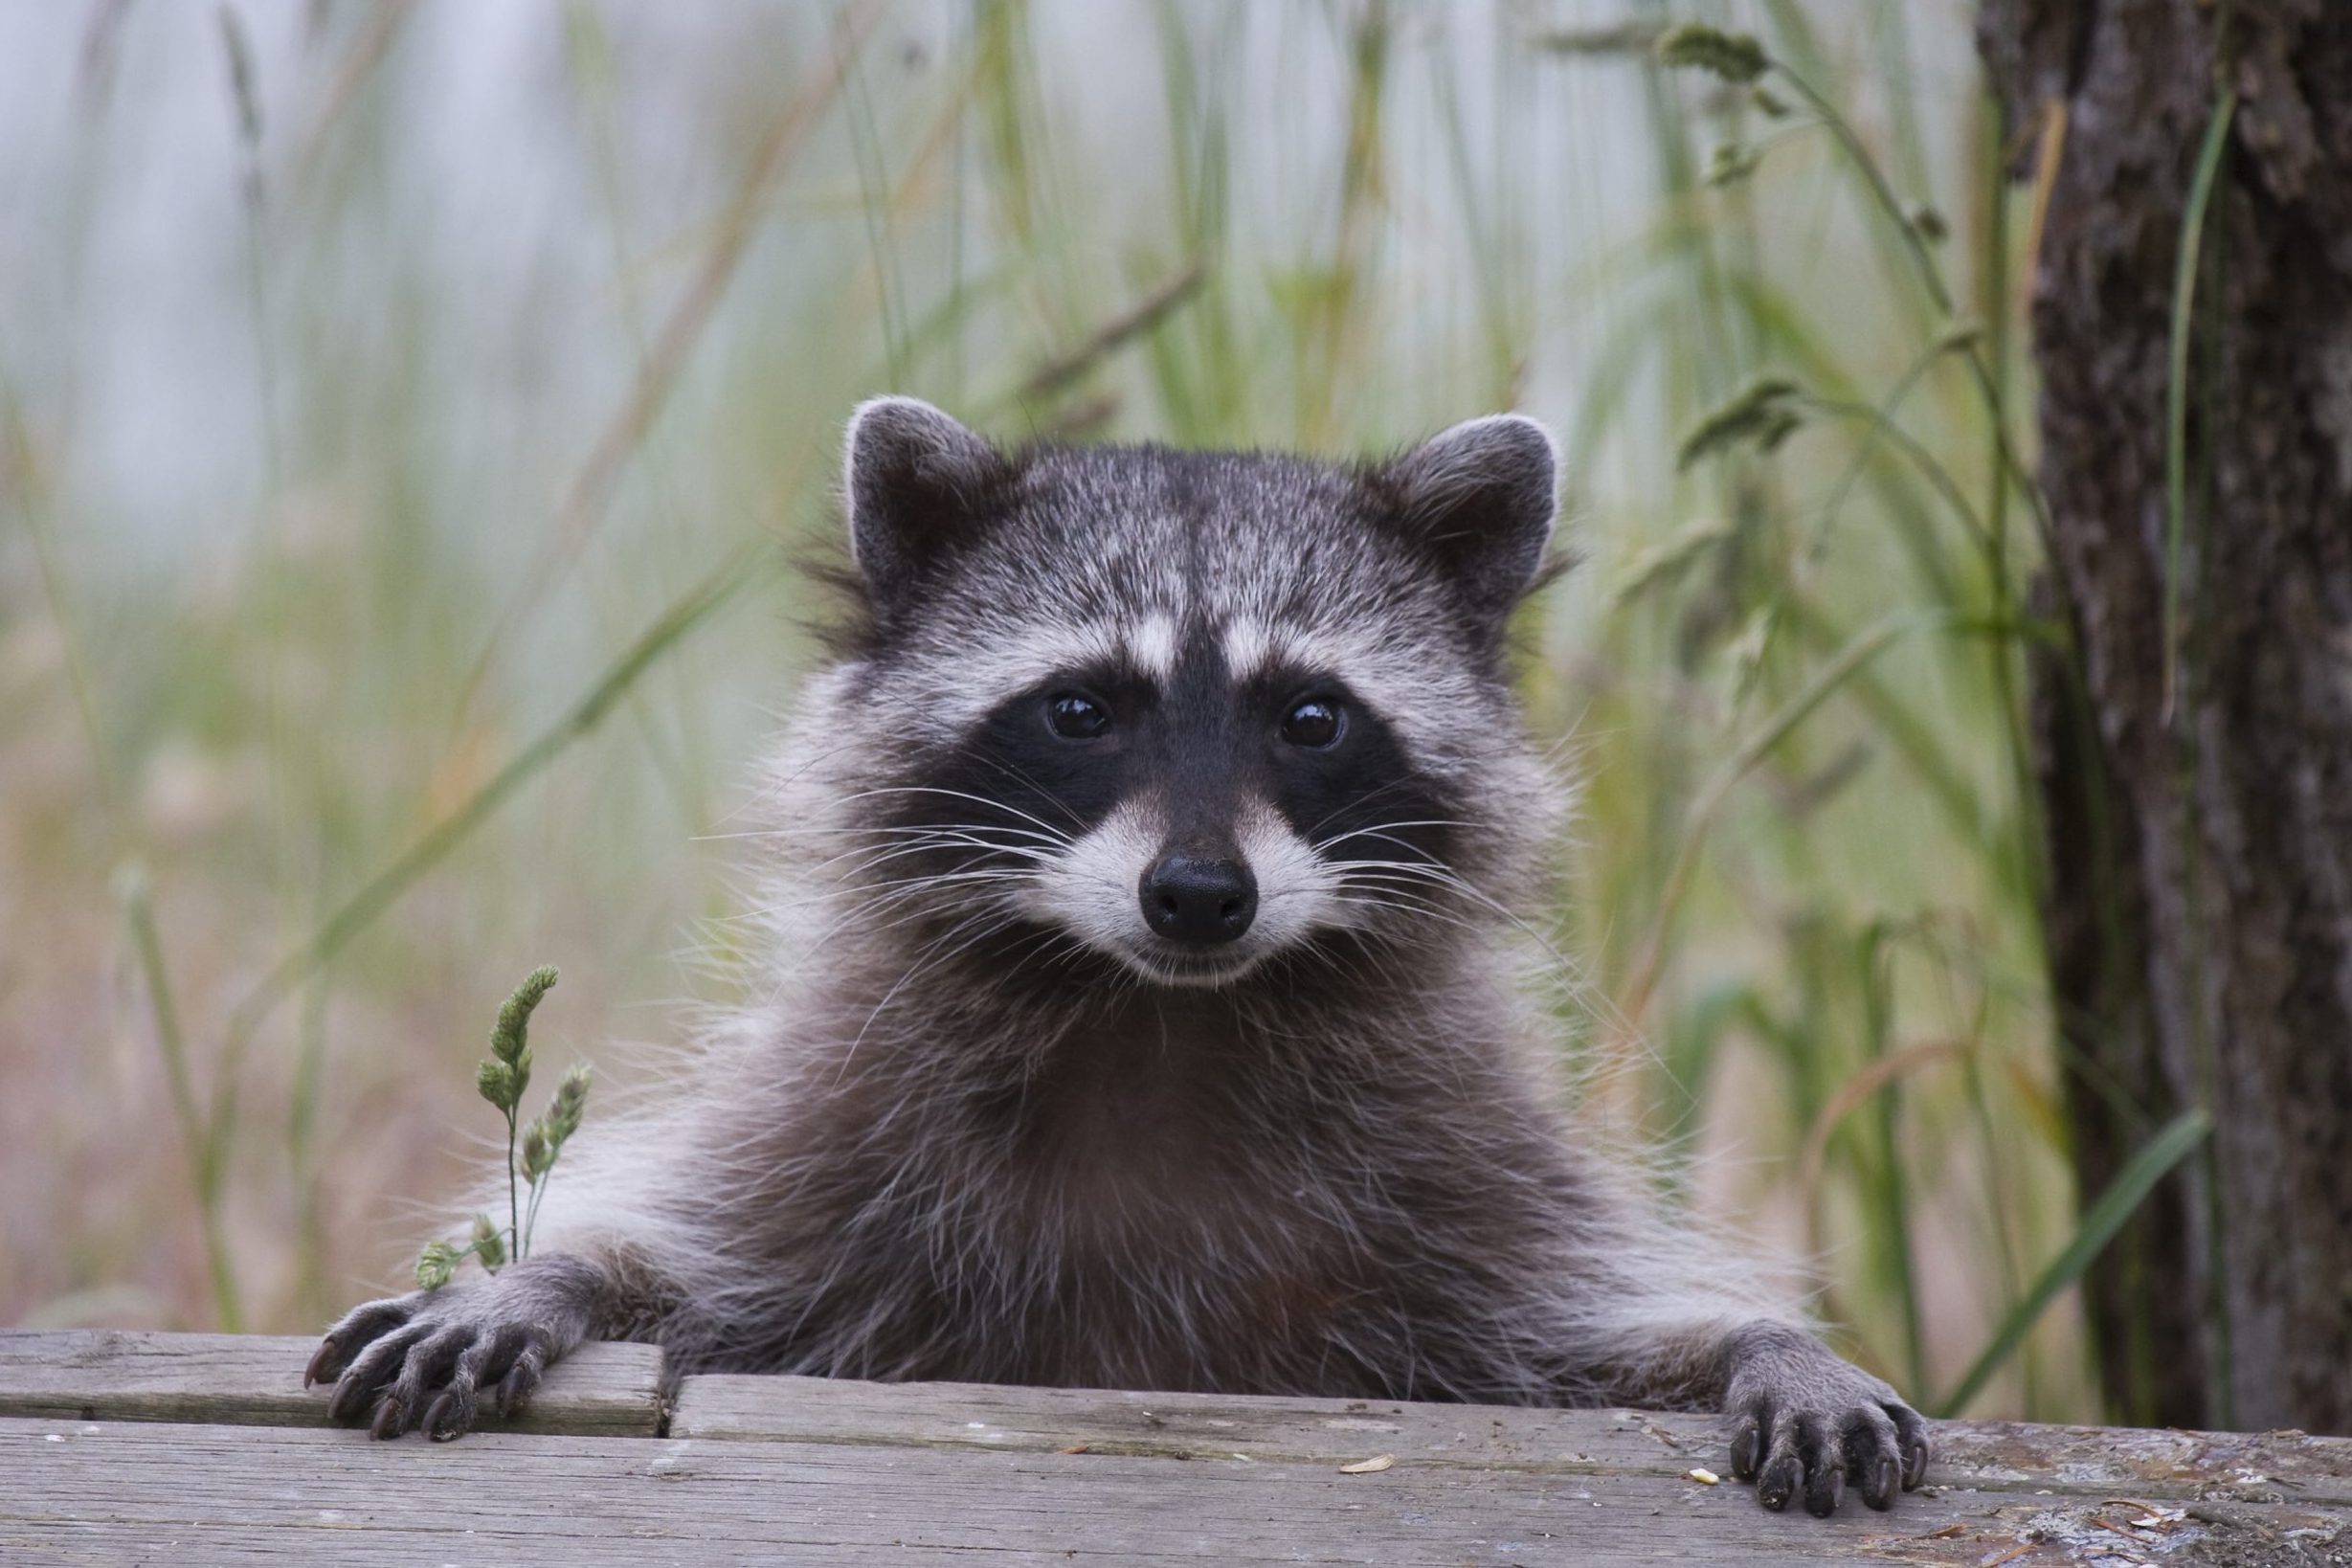 How To Make A Raccoon Come To You